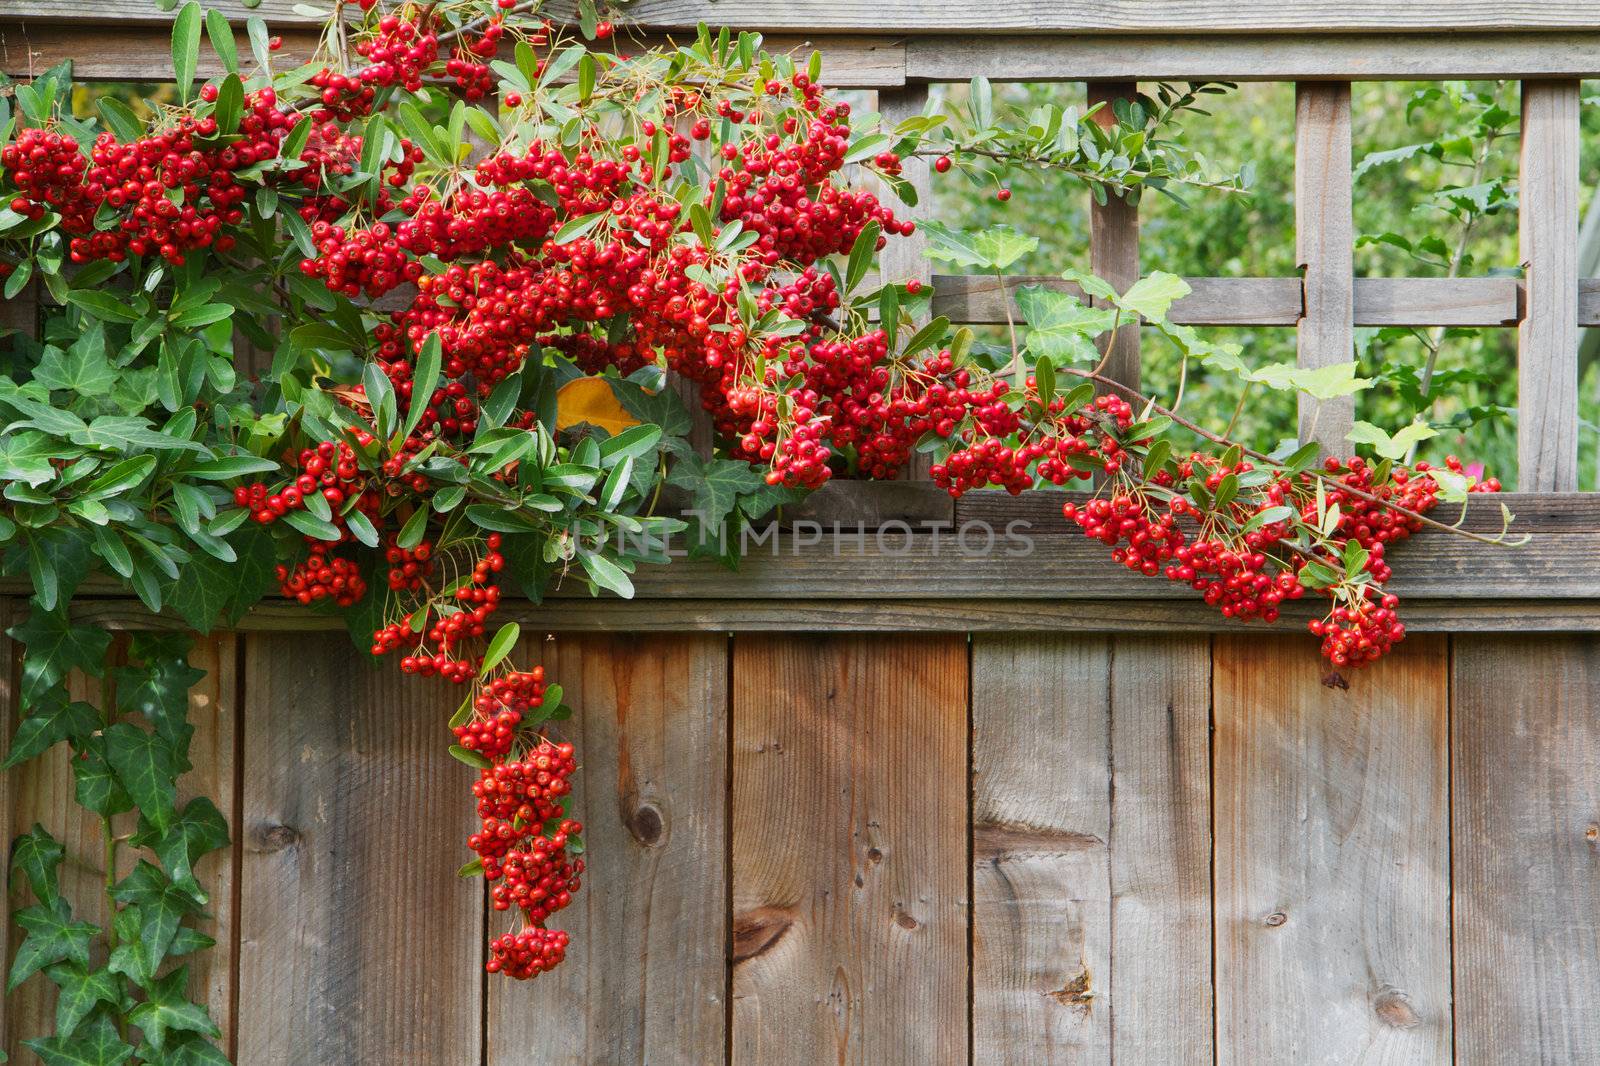 Pyracantha plant climbing on and over a redwood fence with red berries